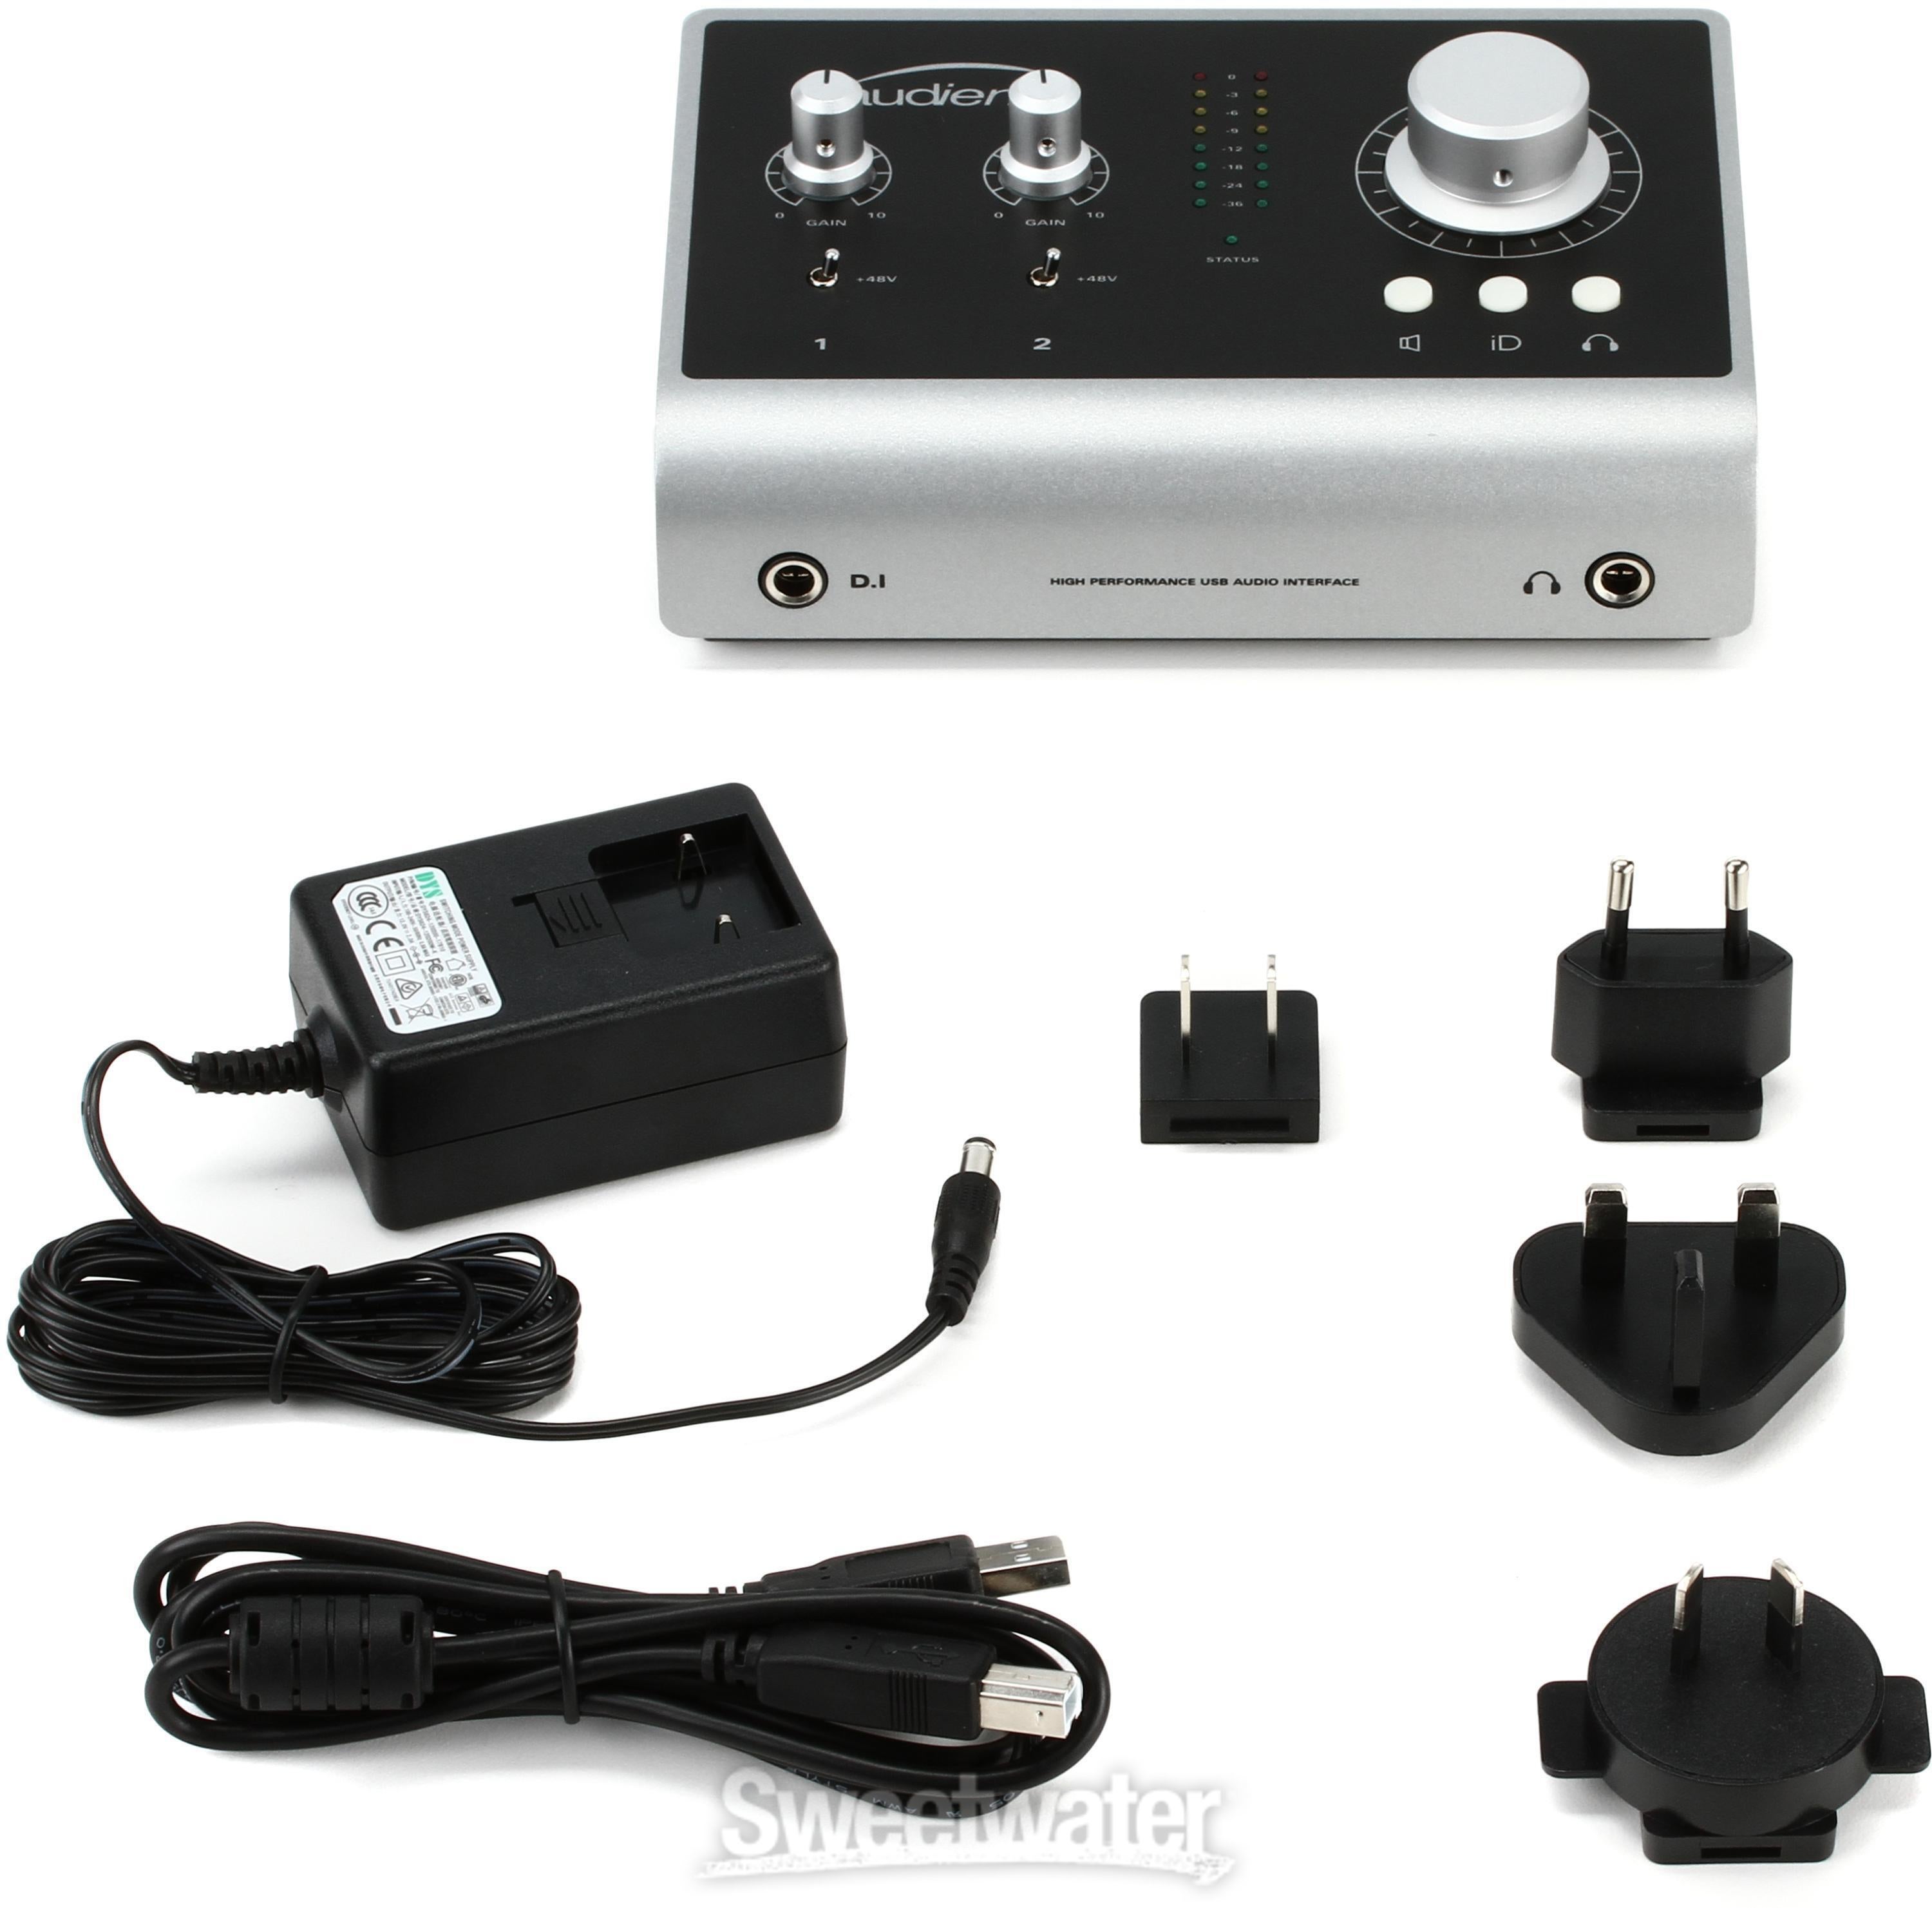 Audient iD14 USB Audio Interface | Sweetwater